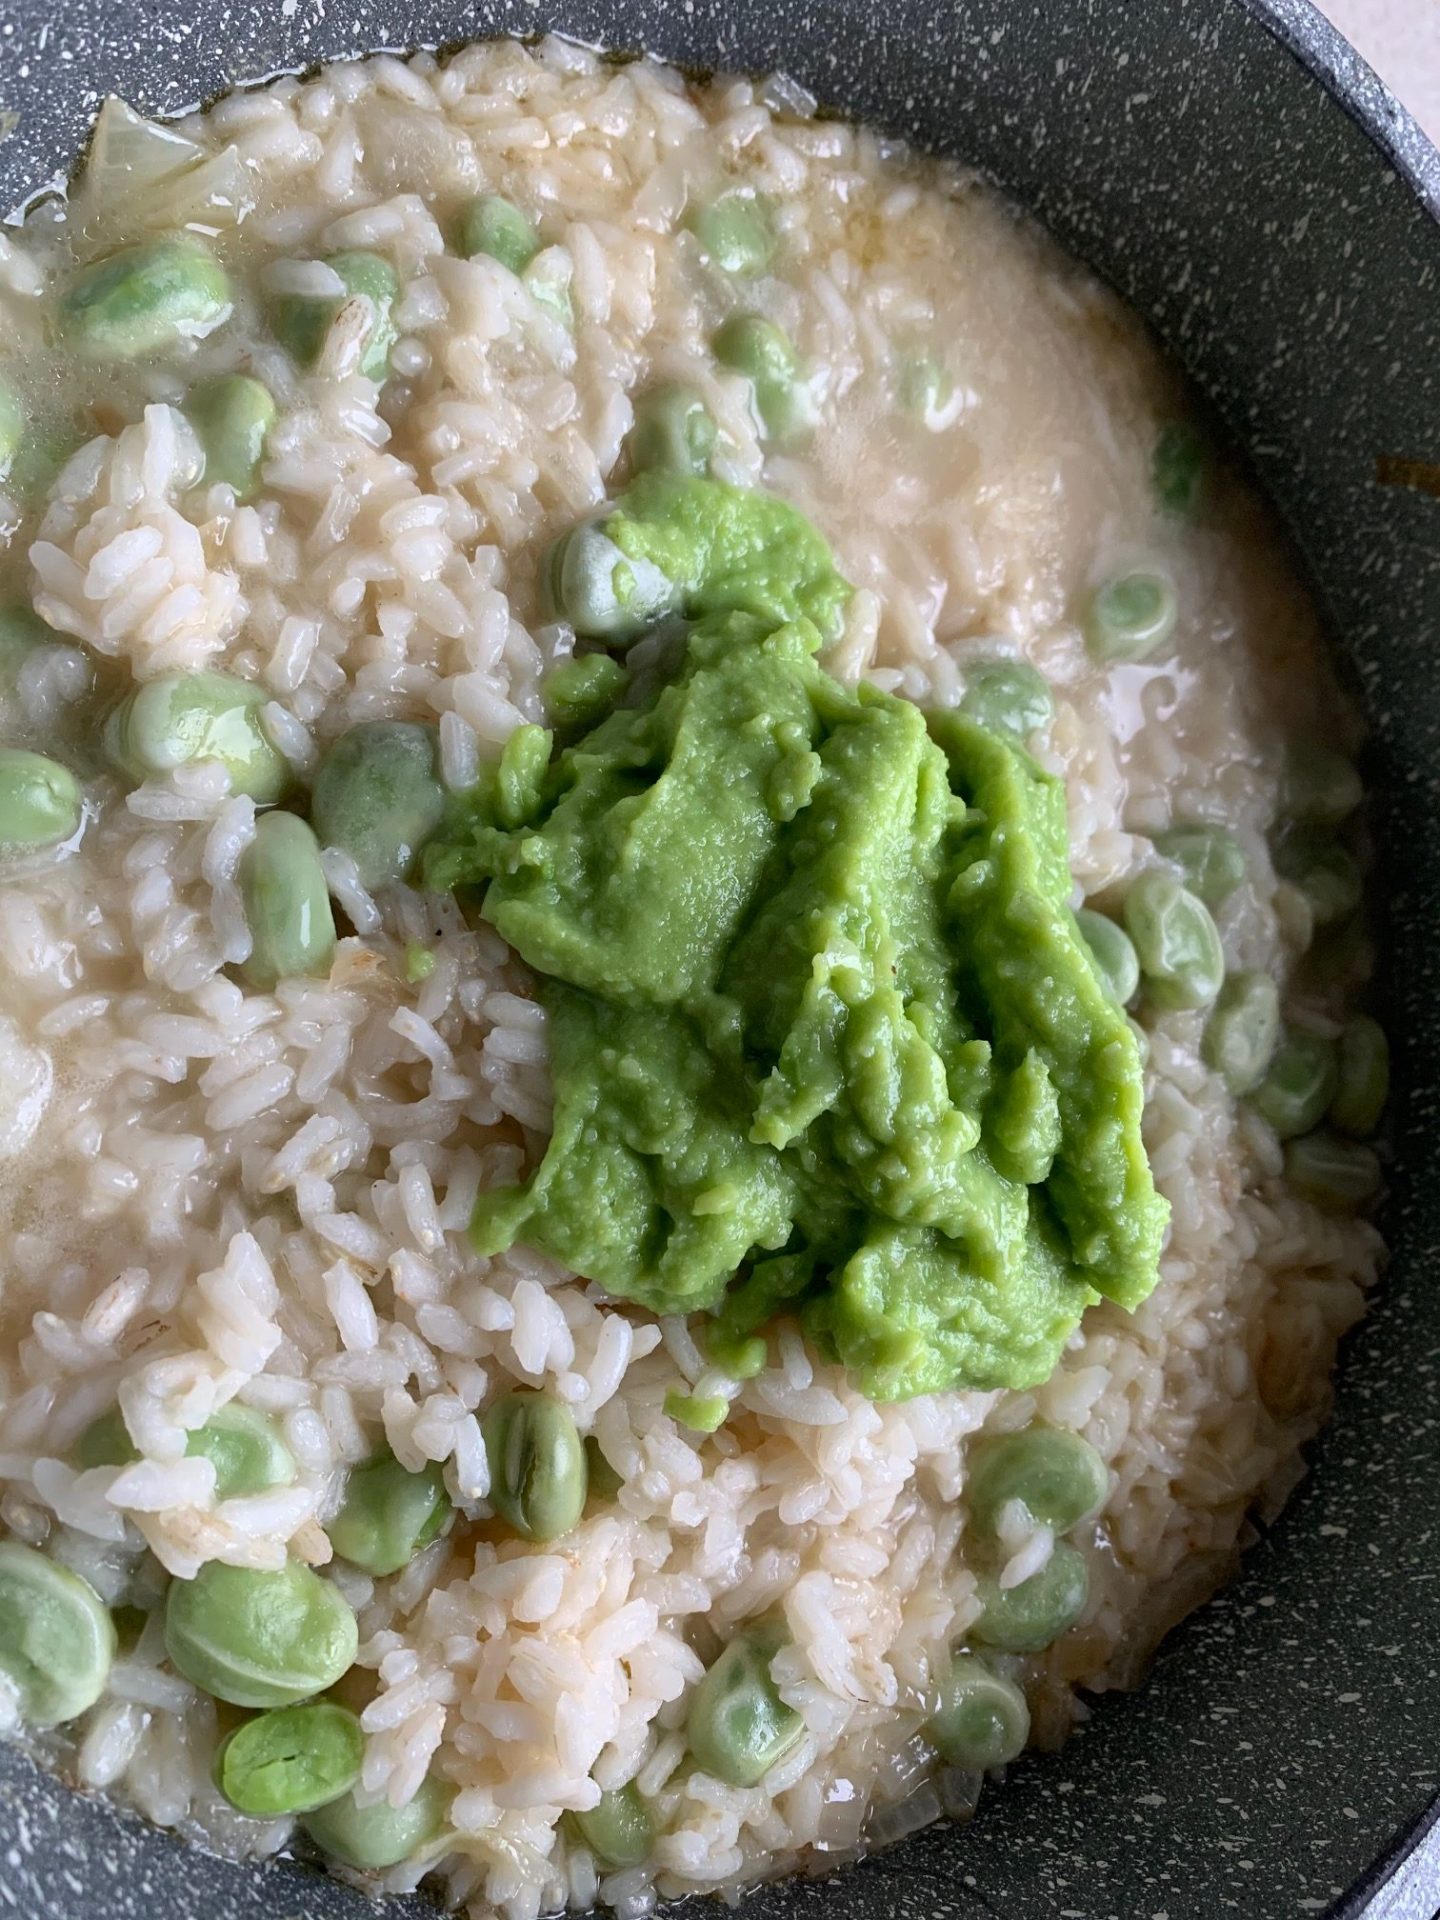 Fava beans risotto - how to cook the perfect risotto at home